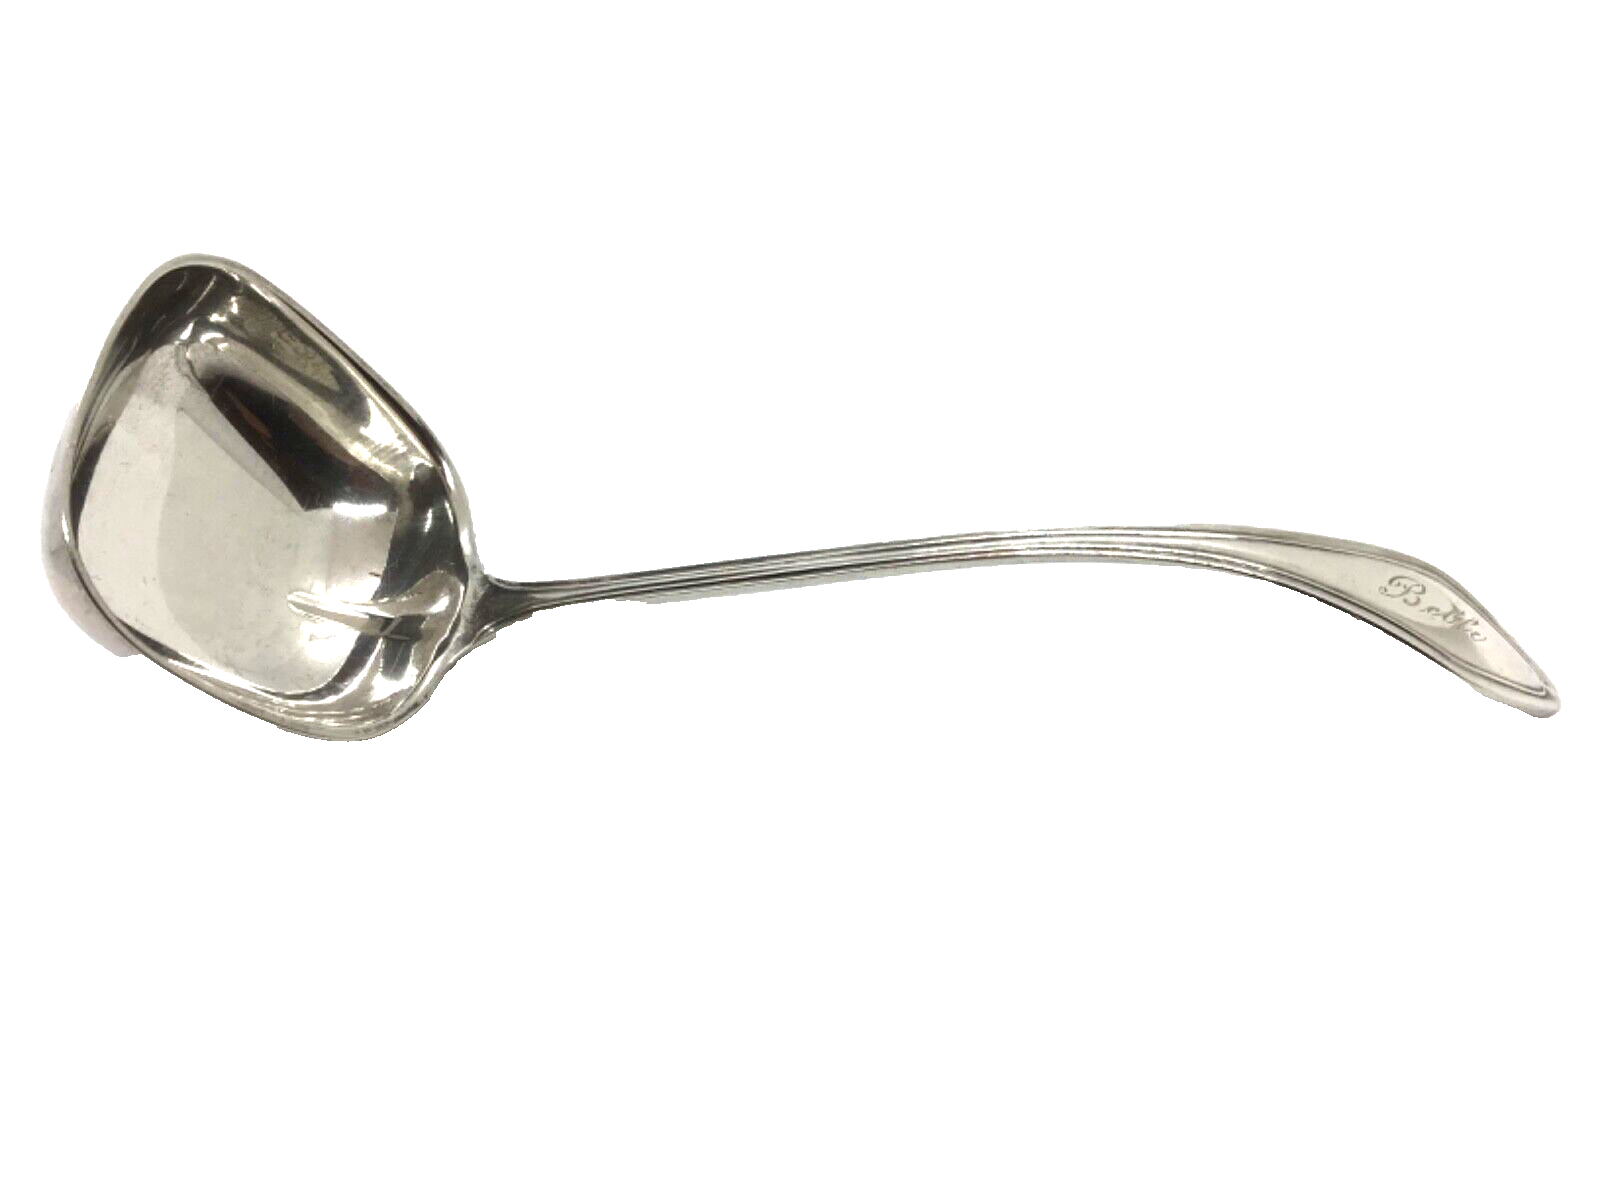 Primary image for Sterling Silver Ladle Lady Chilton Pattern 1912 TOWLE Silver Company Monogrammed